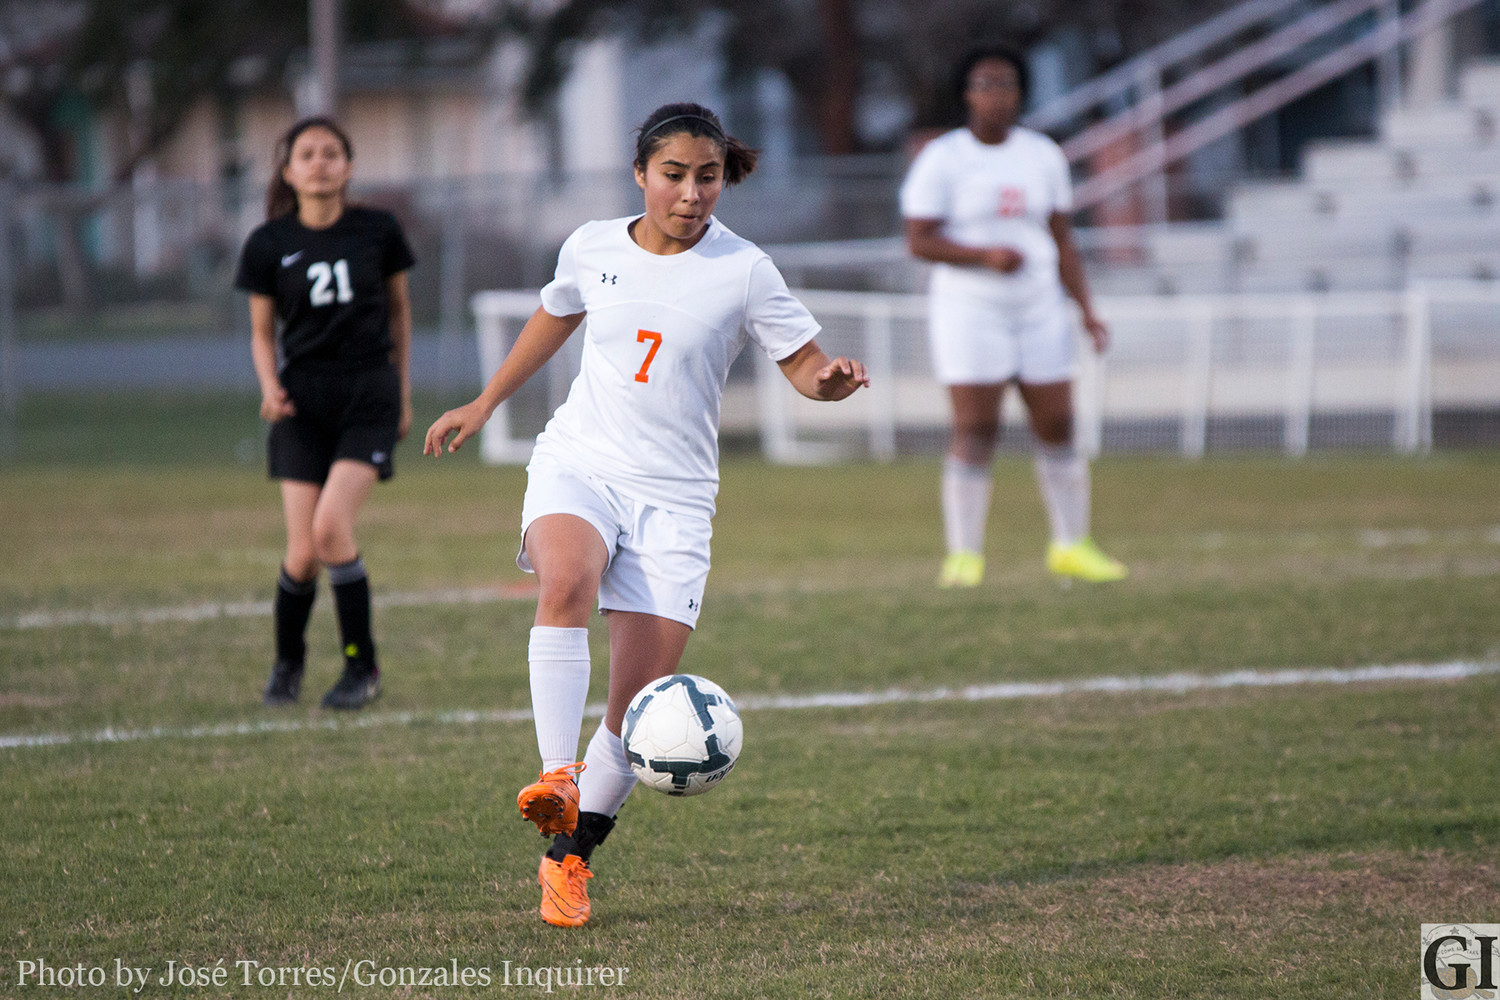 Senior Fernanda Velazquez will be a key player for the Gonzales Lady Apaches, not only on the field but off as well. Her skill as well as knowledge of the game will be a factor.